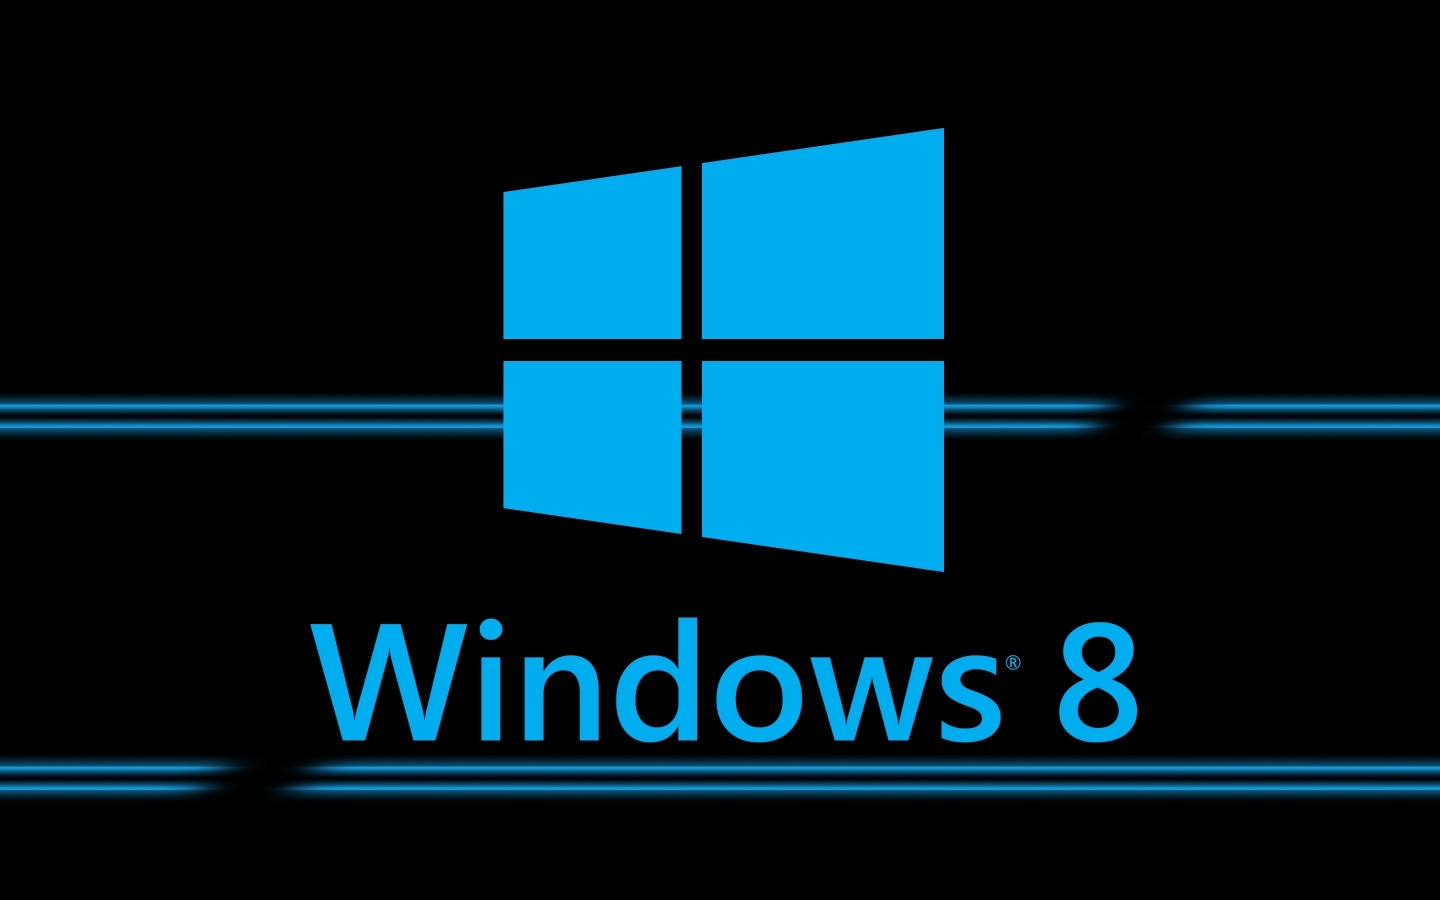 Windows 8 New for 1440 x 900 widescreen resolution